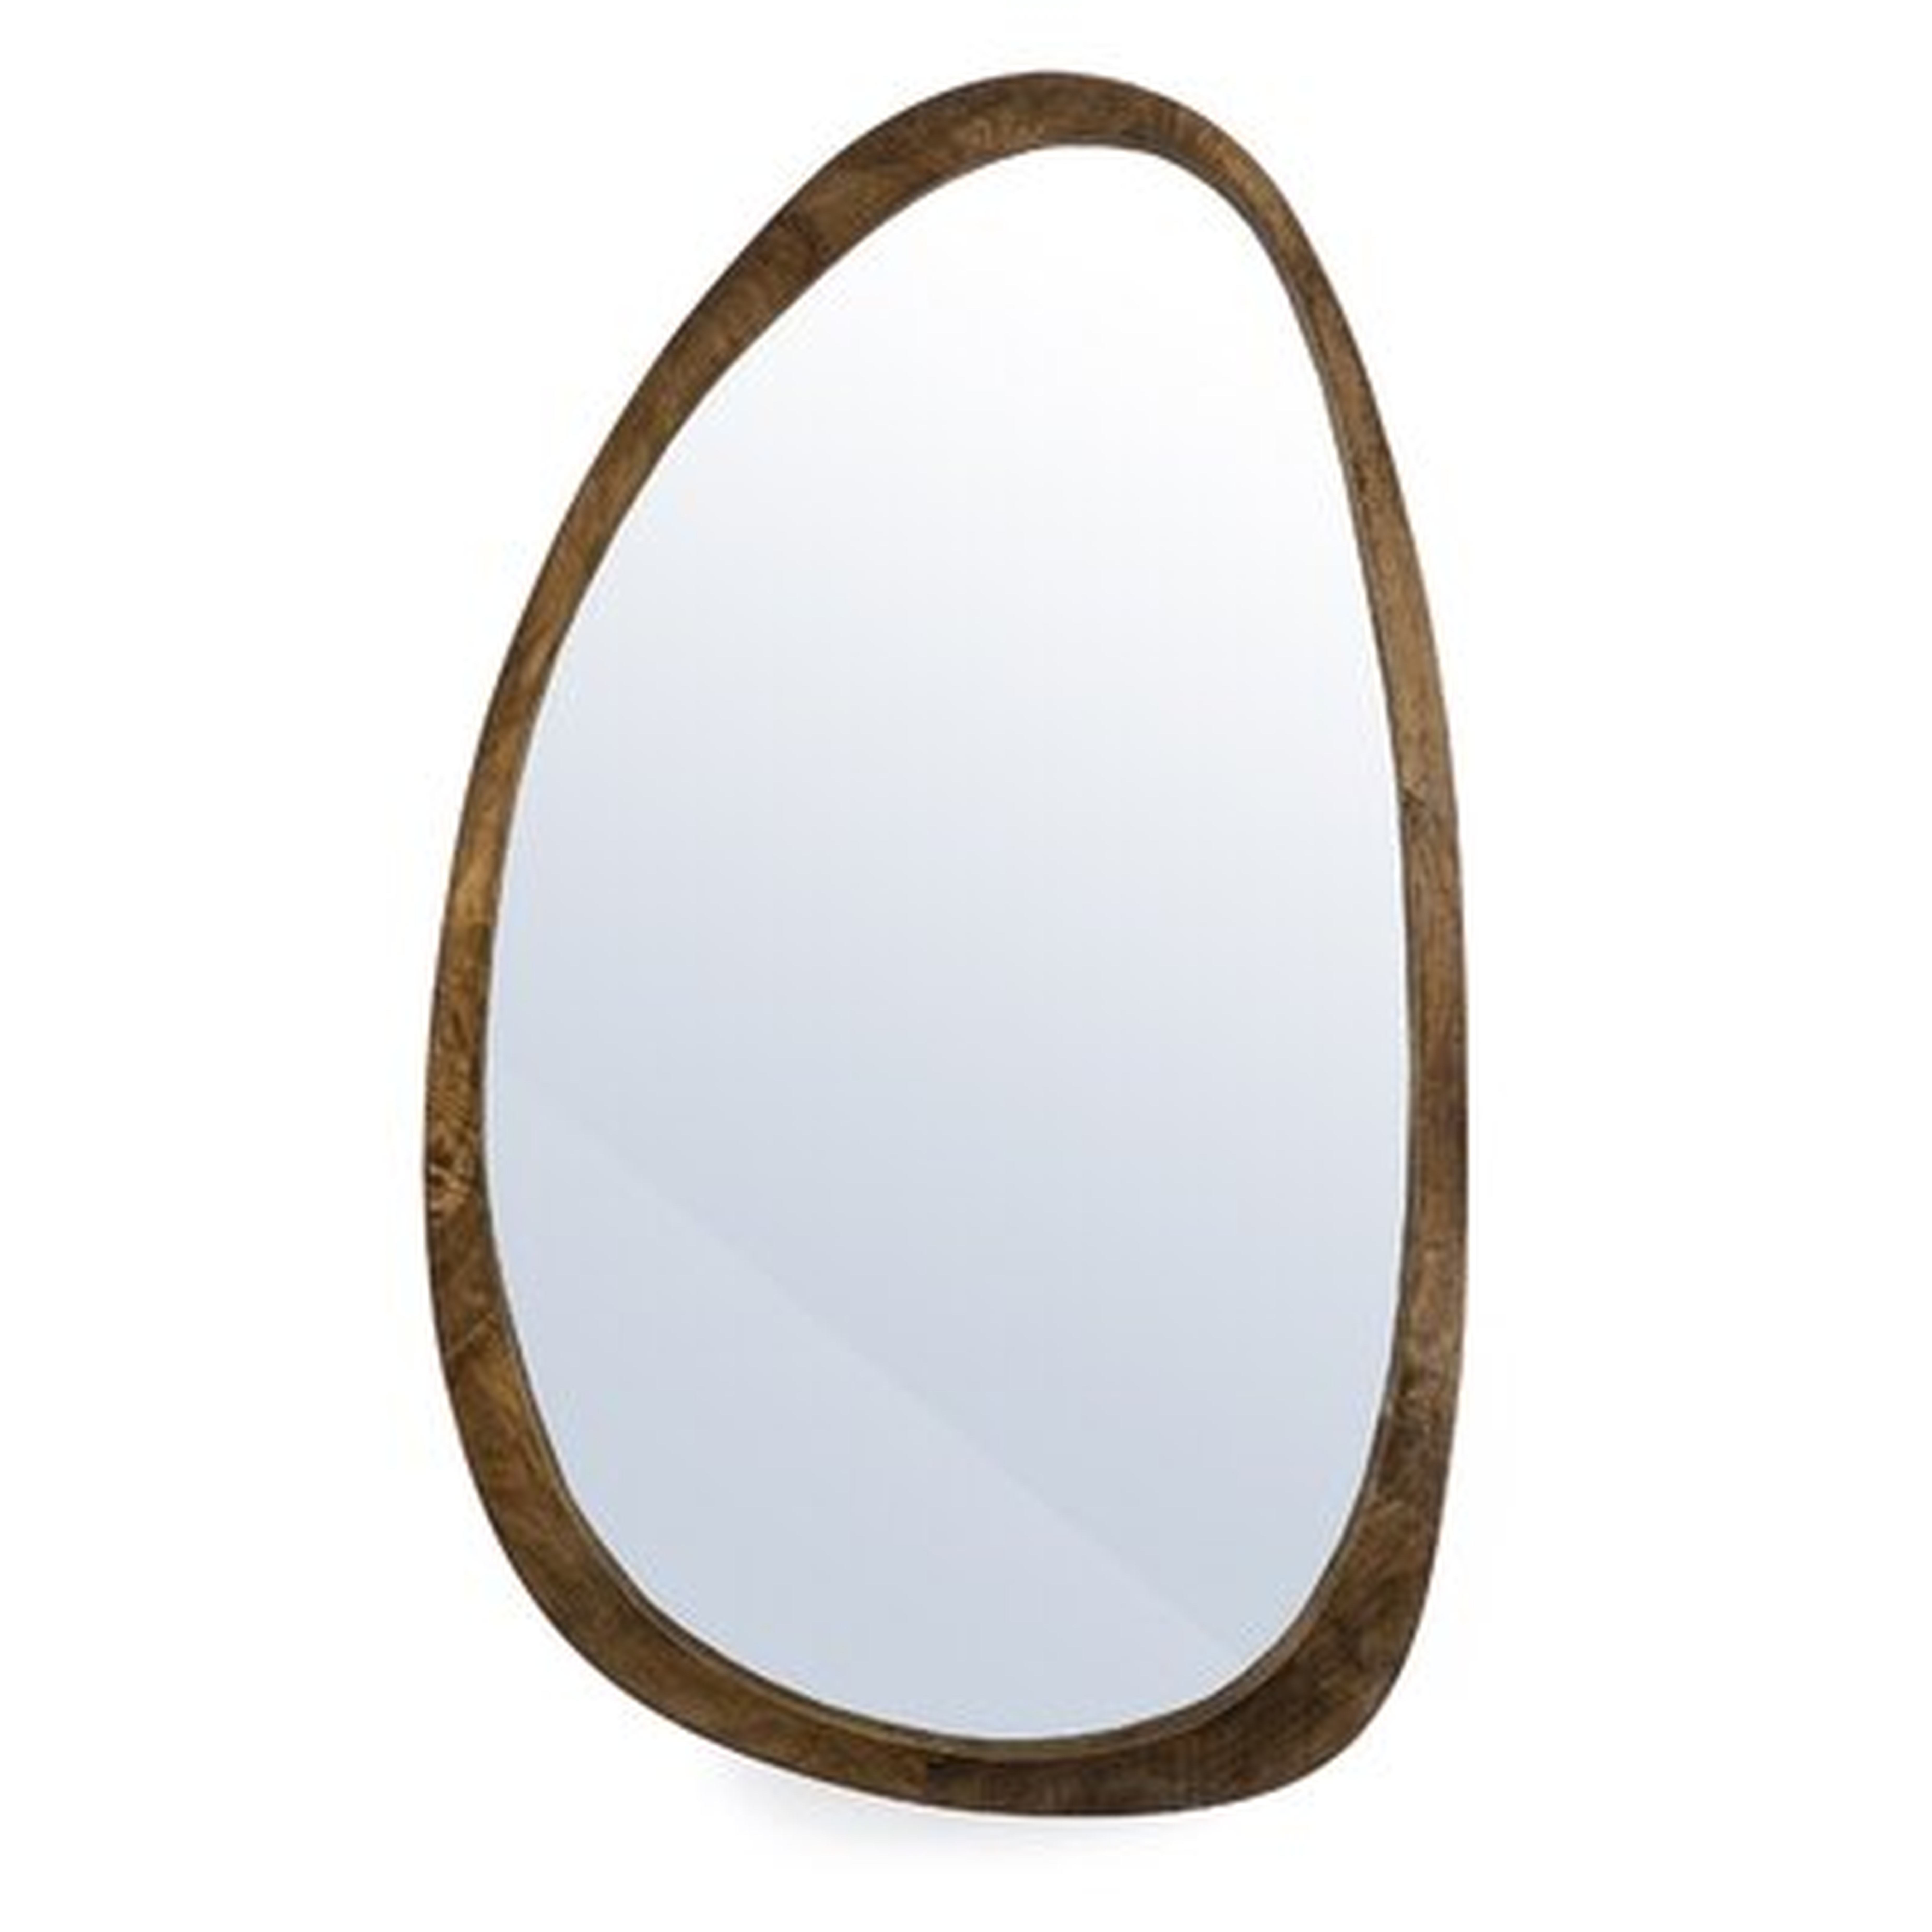 Plectro Beveled Magnifying Accent Mirror [AVAIL. OCT 2021] - Wayfair